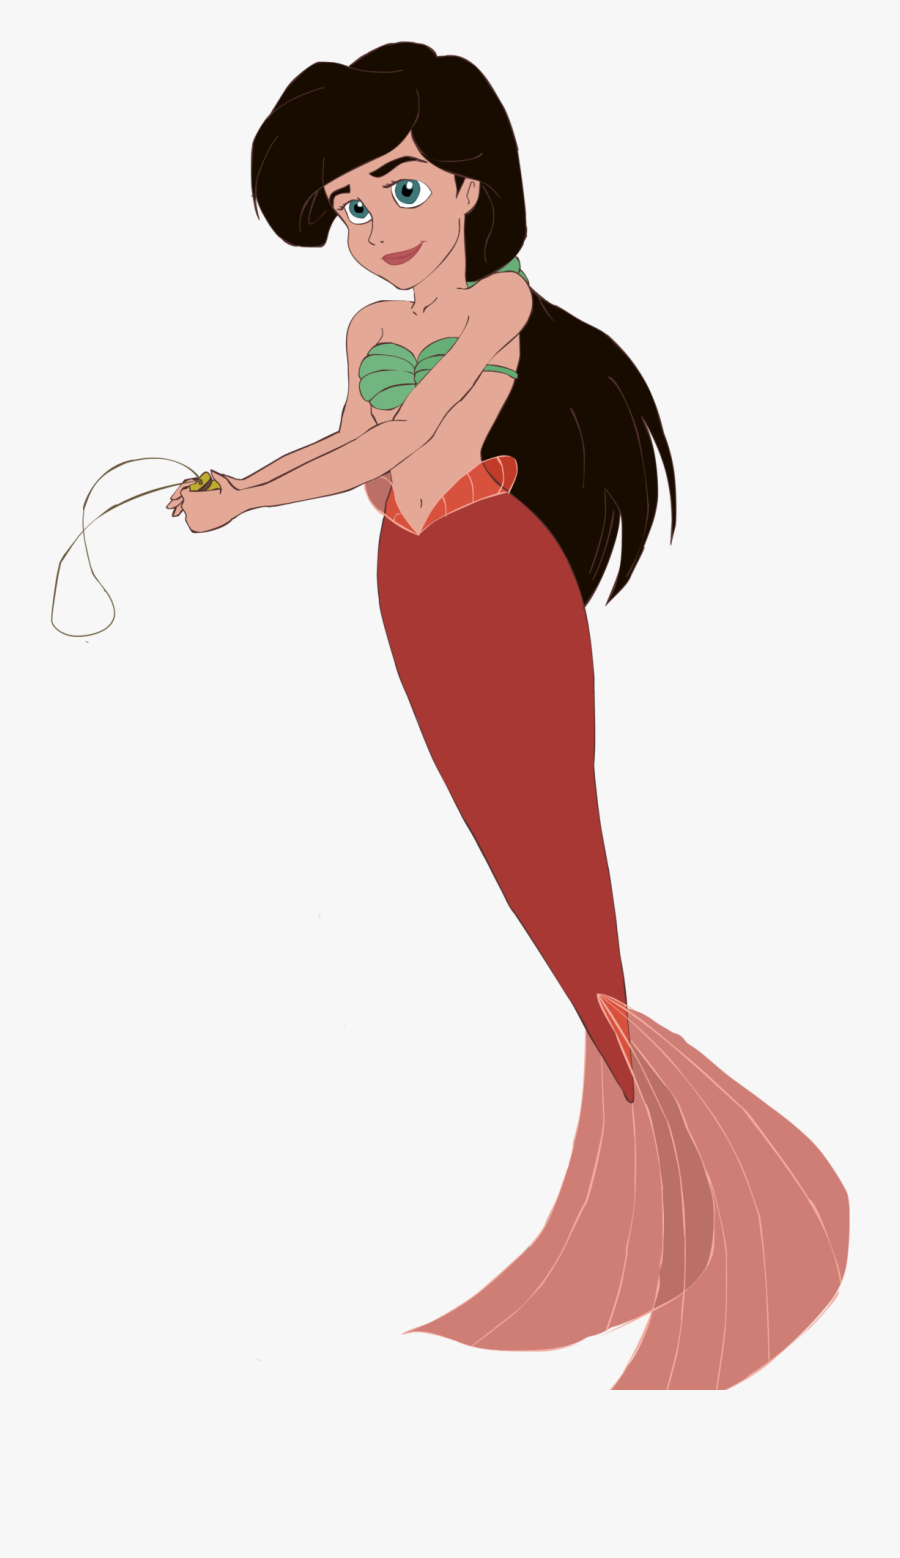 Young By Mikesmallkjhgfd On Deviantart - Little Mermaid Melody Png, Transparent Clipart